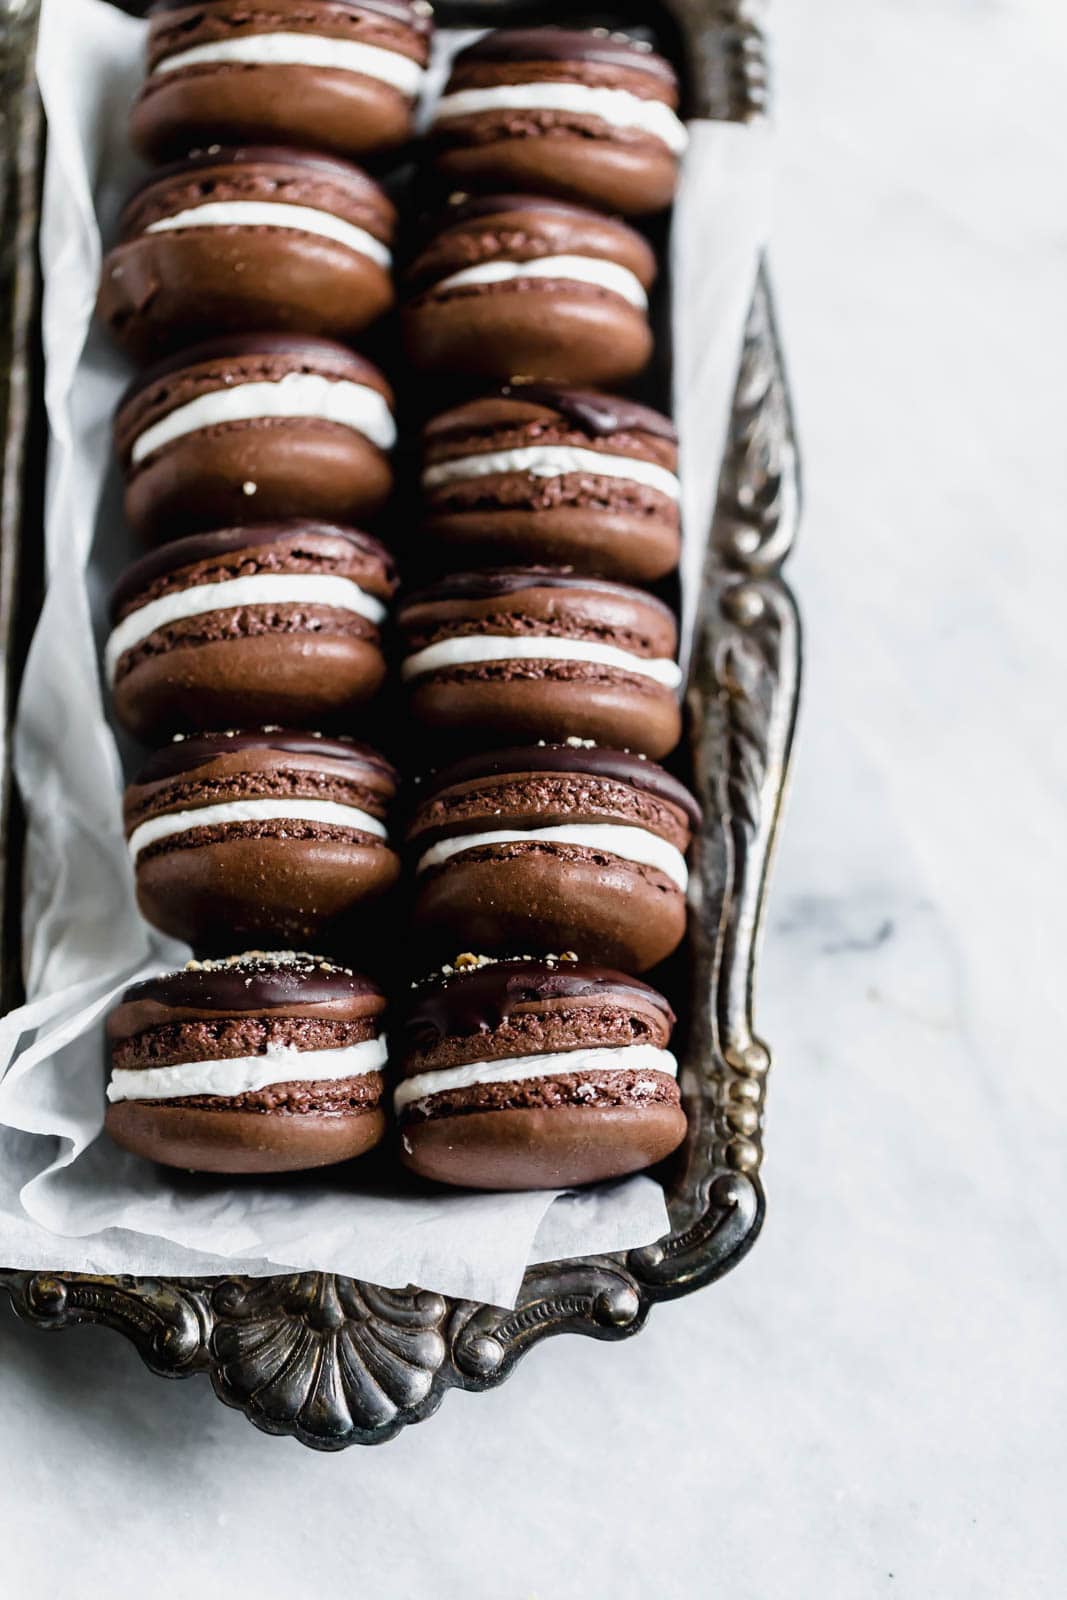 S'mores macarons with chewy chocolate macarons filled with an irresistibly fluffy marshmallow filling. All the classic campfire flavor, without the fire.